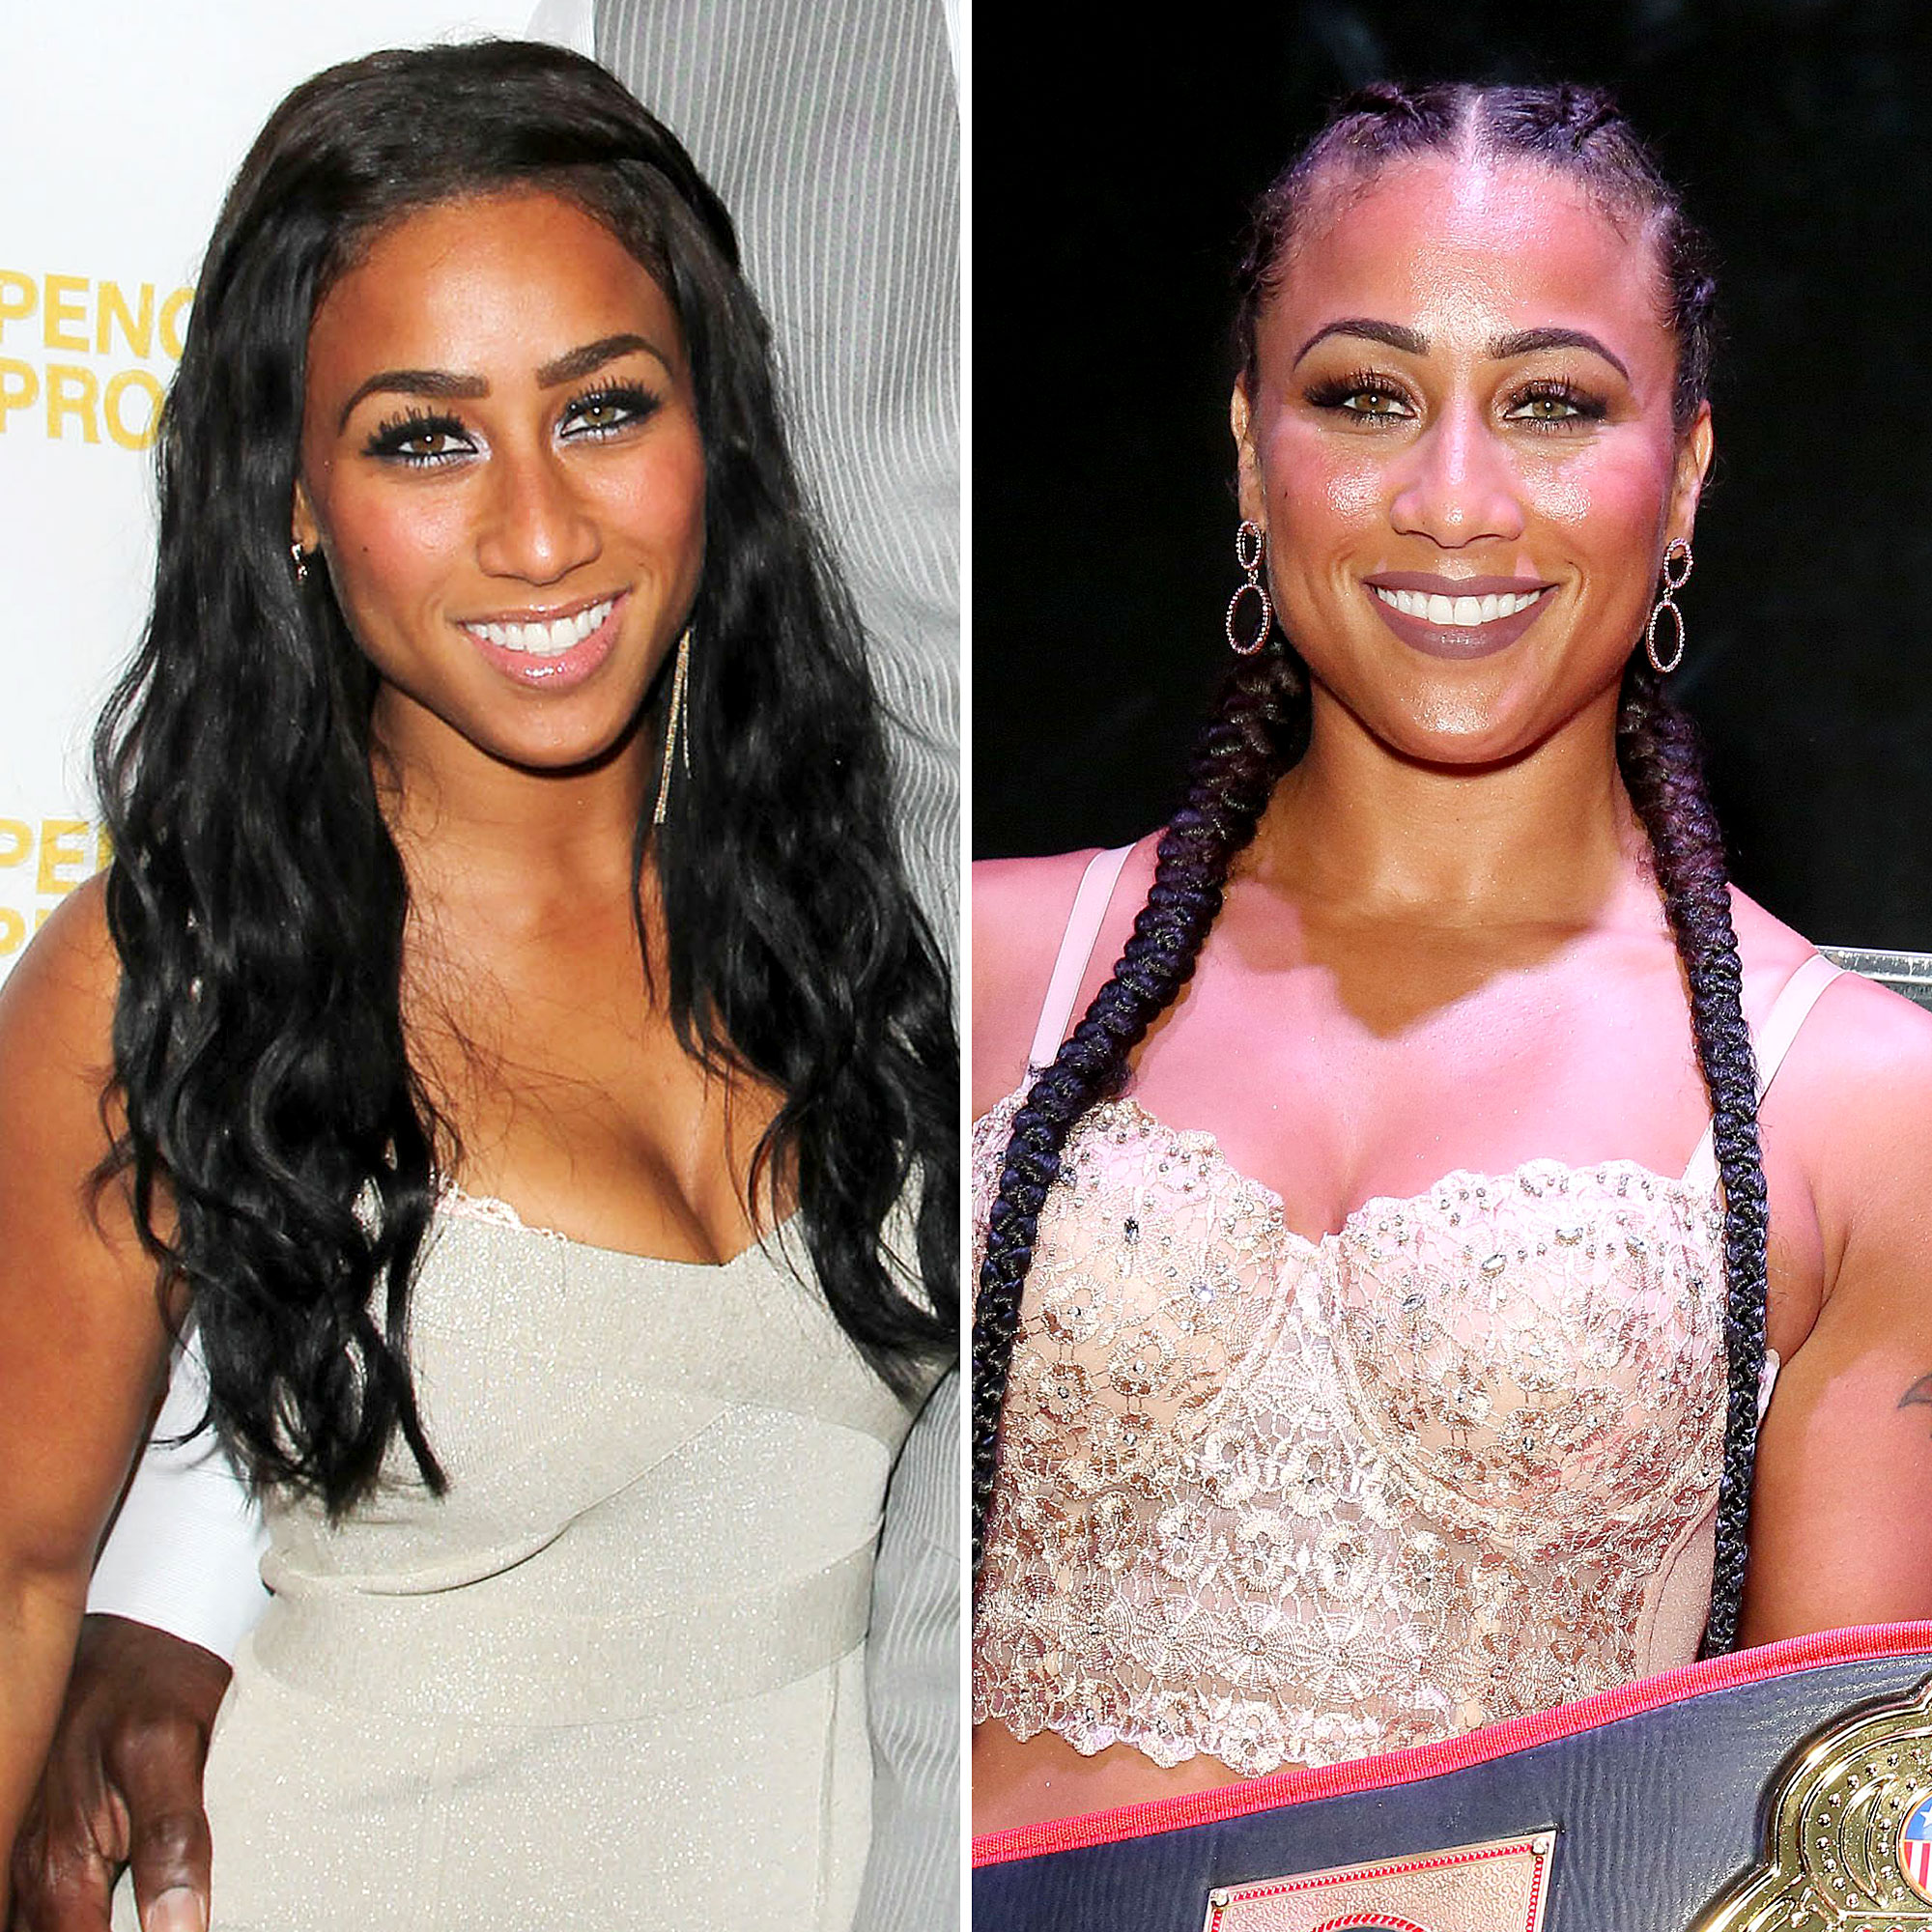 tiffany pollard then and now